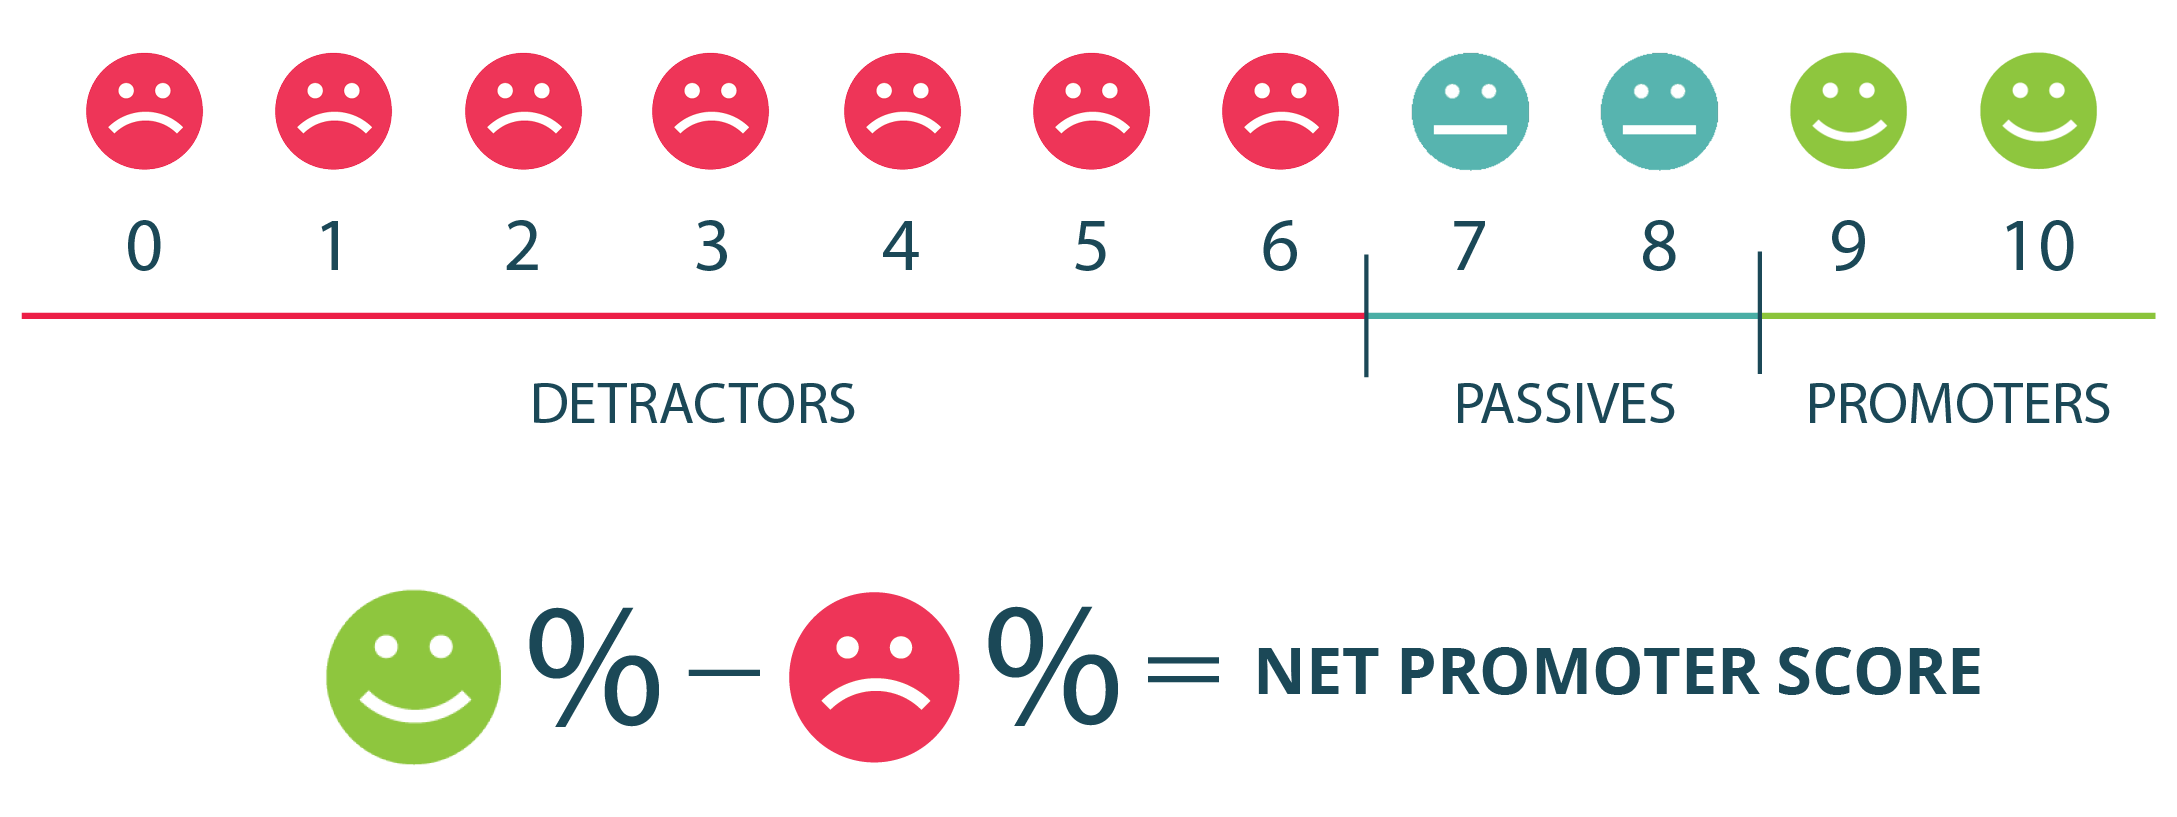 Net Promoter Score scale to measure employee engagement